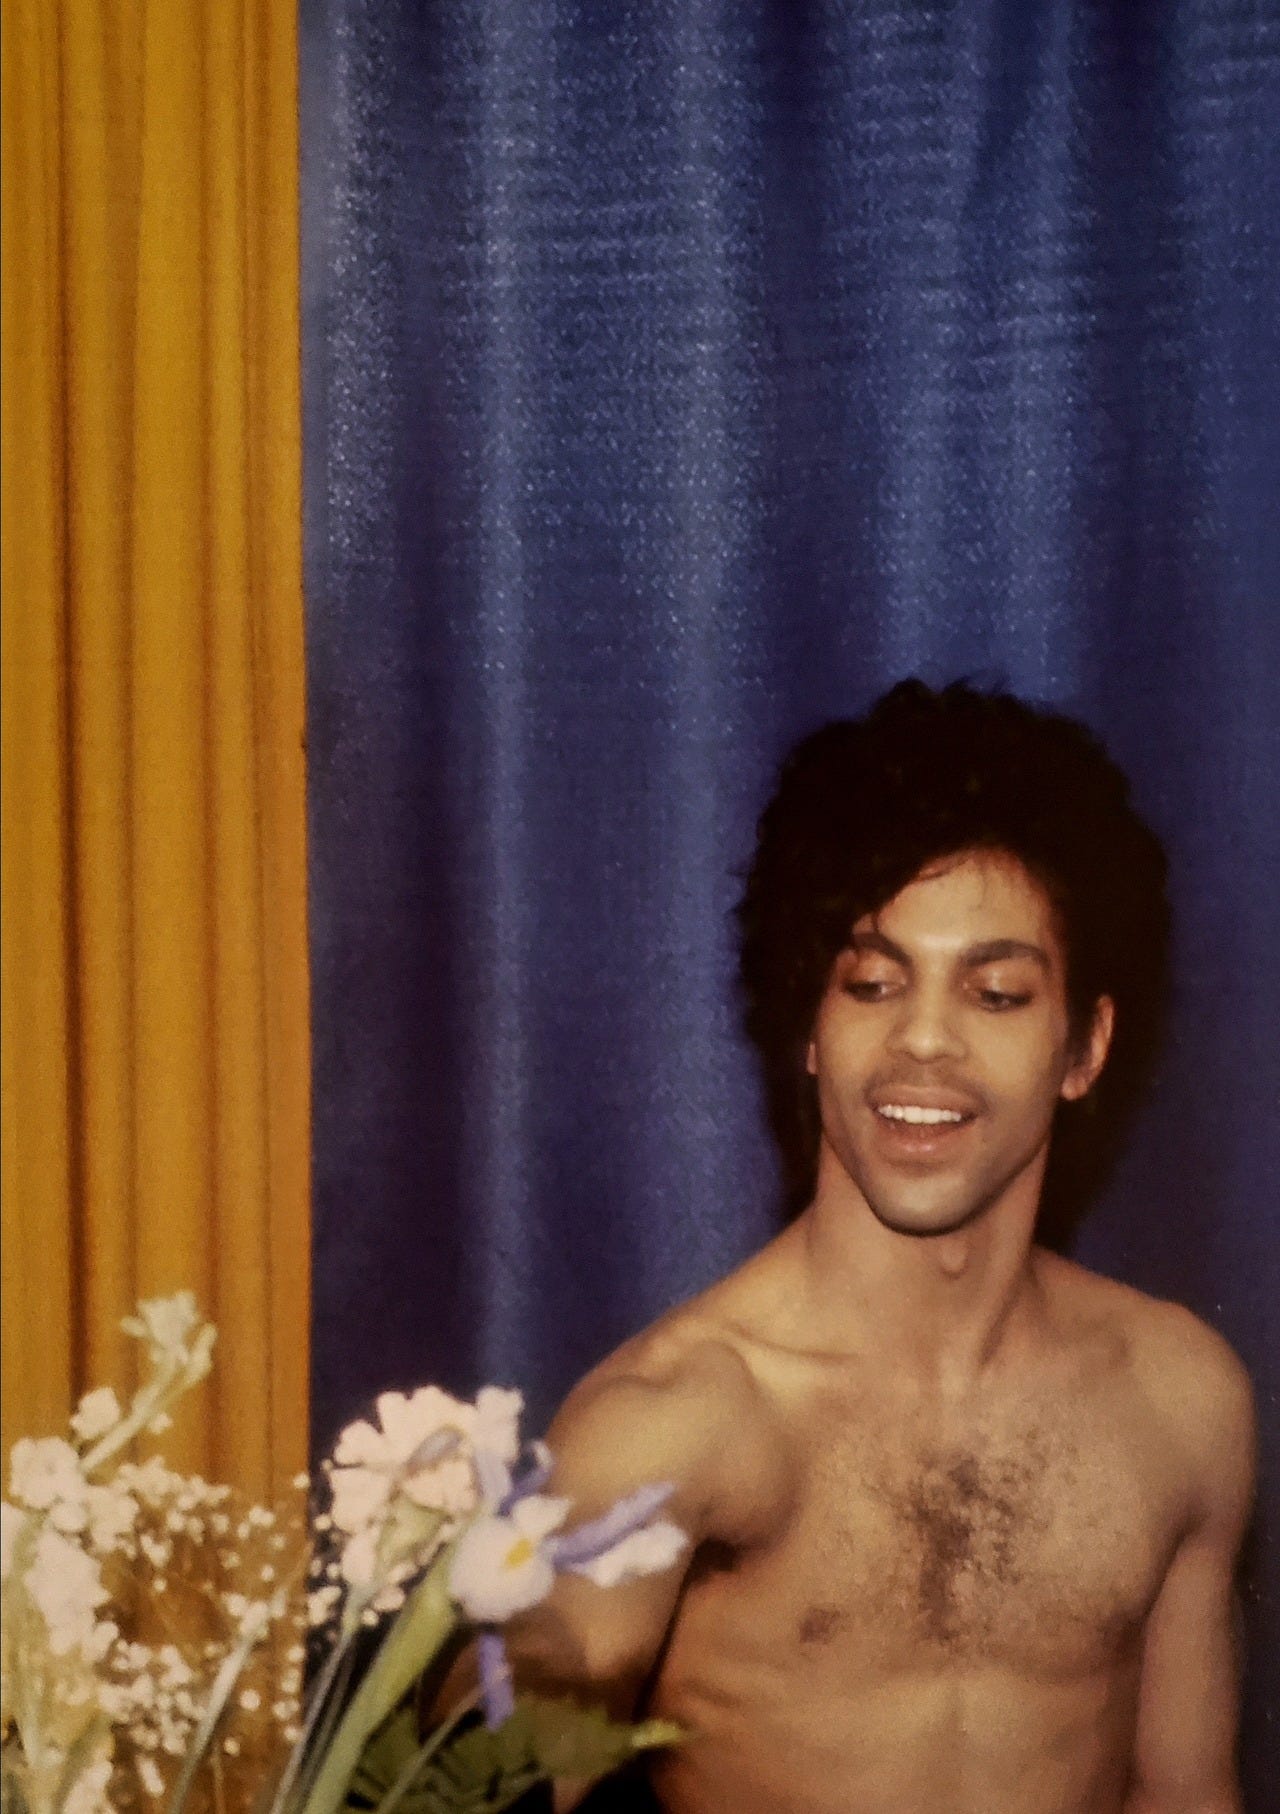 Prince 1999 Super Deluxe Vault Tracks Review By Vicky Likes Music The Violet Reality